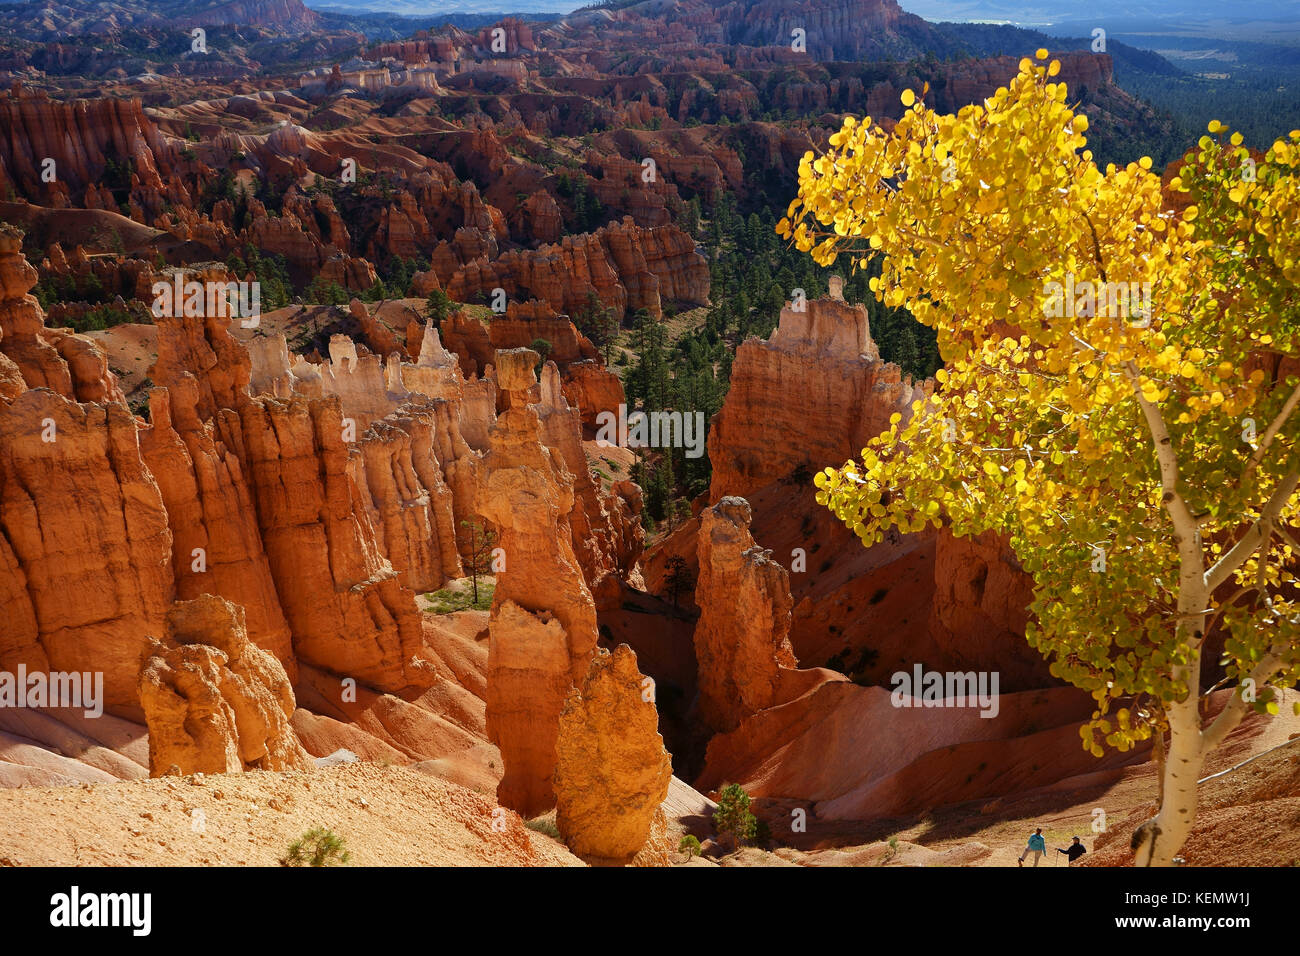 Aspen tree in fall colors and Brice Canyon National Park, Utah, USa Stock Photo